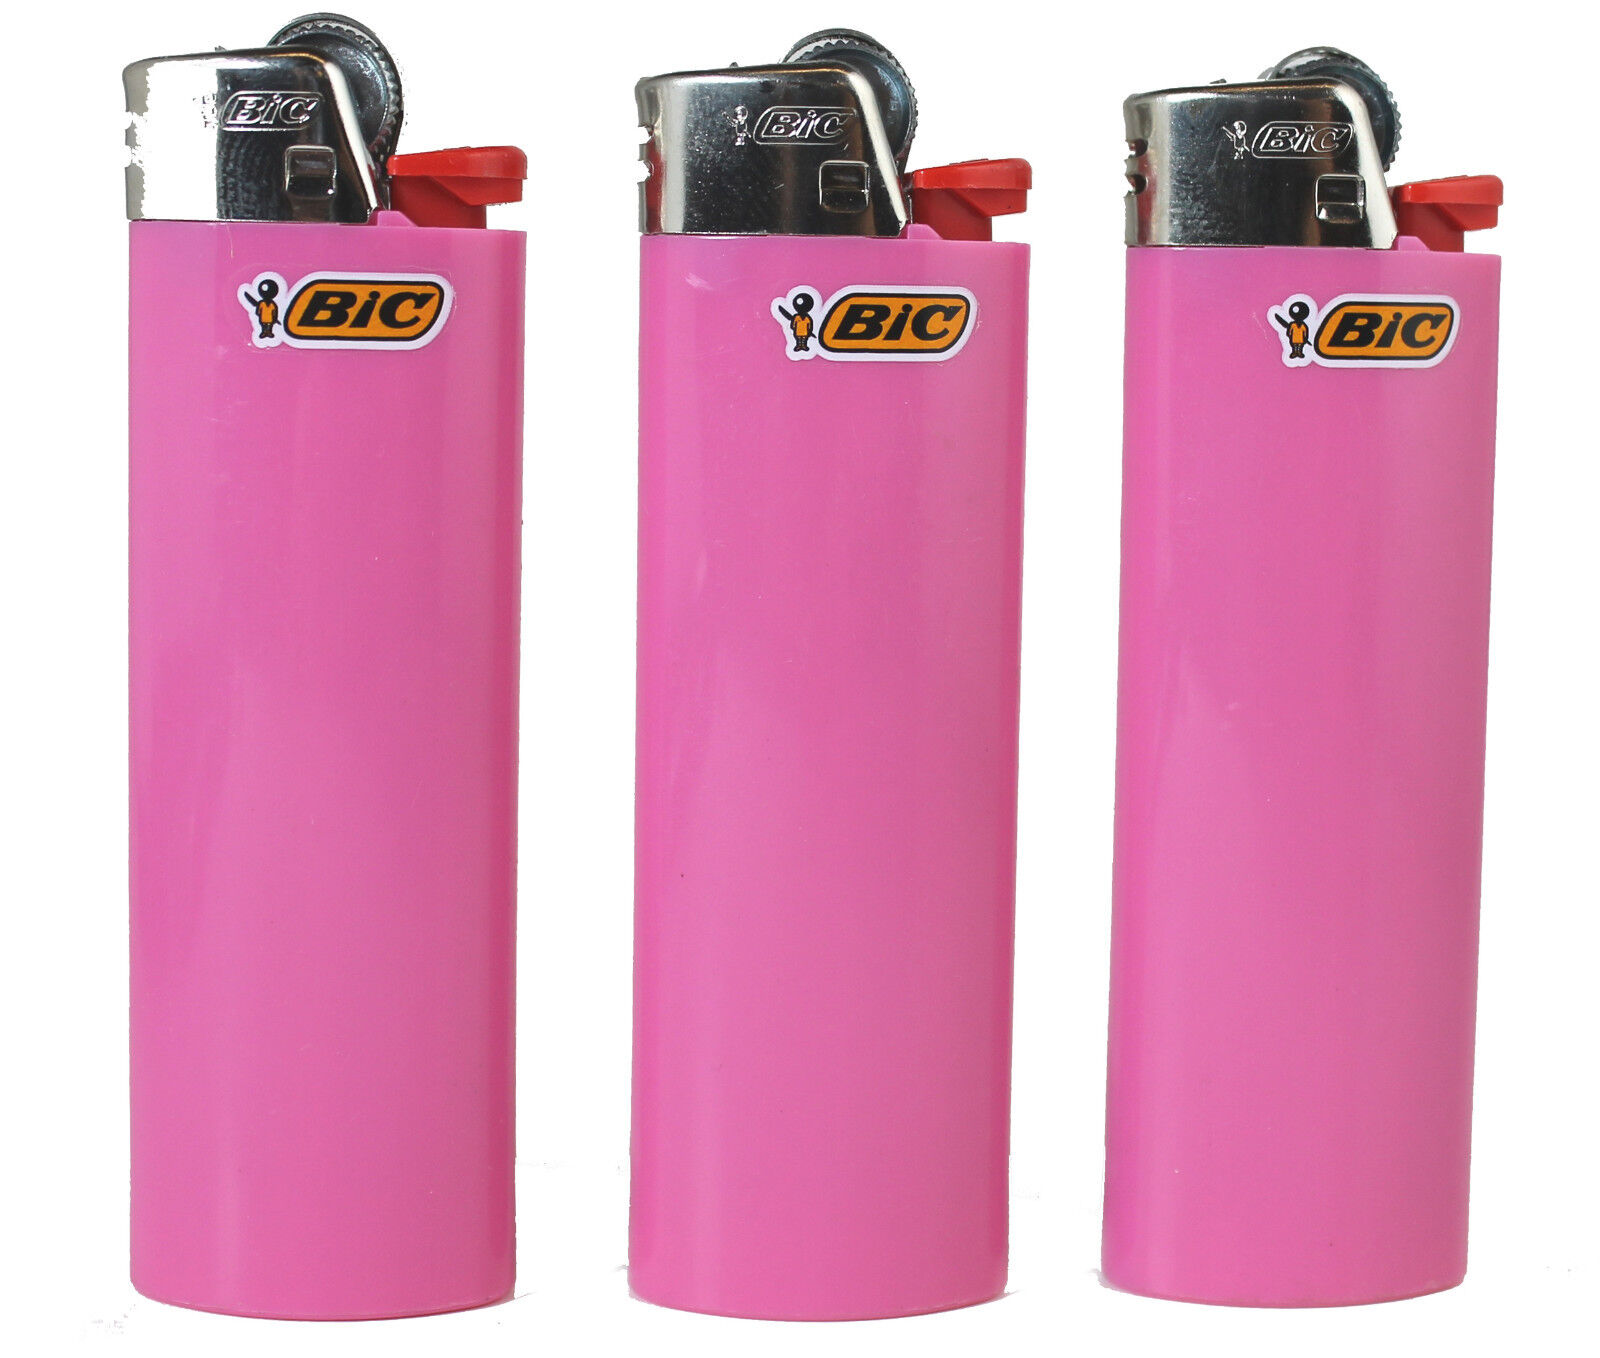 3 Pink Bic Lighters - Standard Size Solid All Pink Bic Lighters